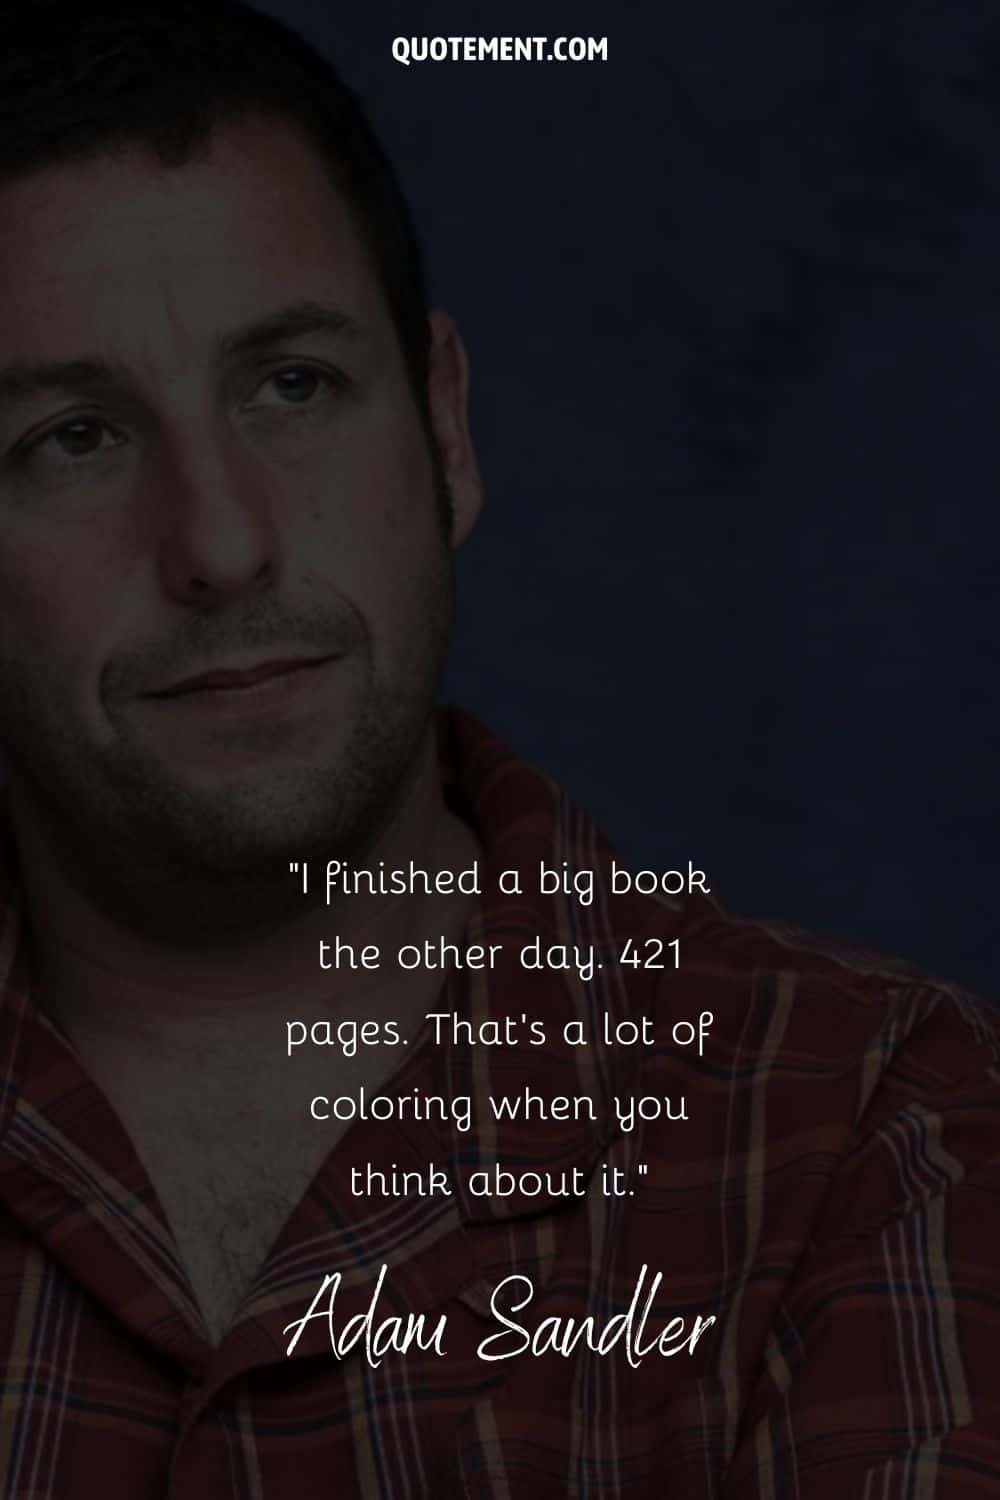 Funny inspiring quote about books by Adam Sandler